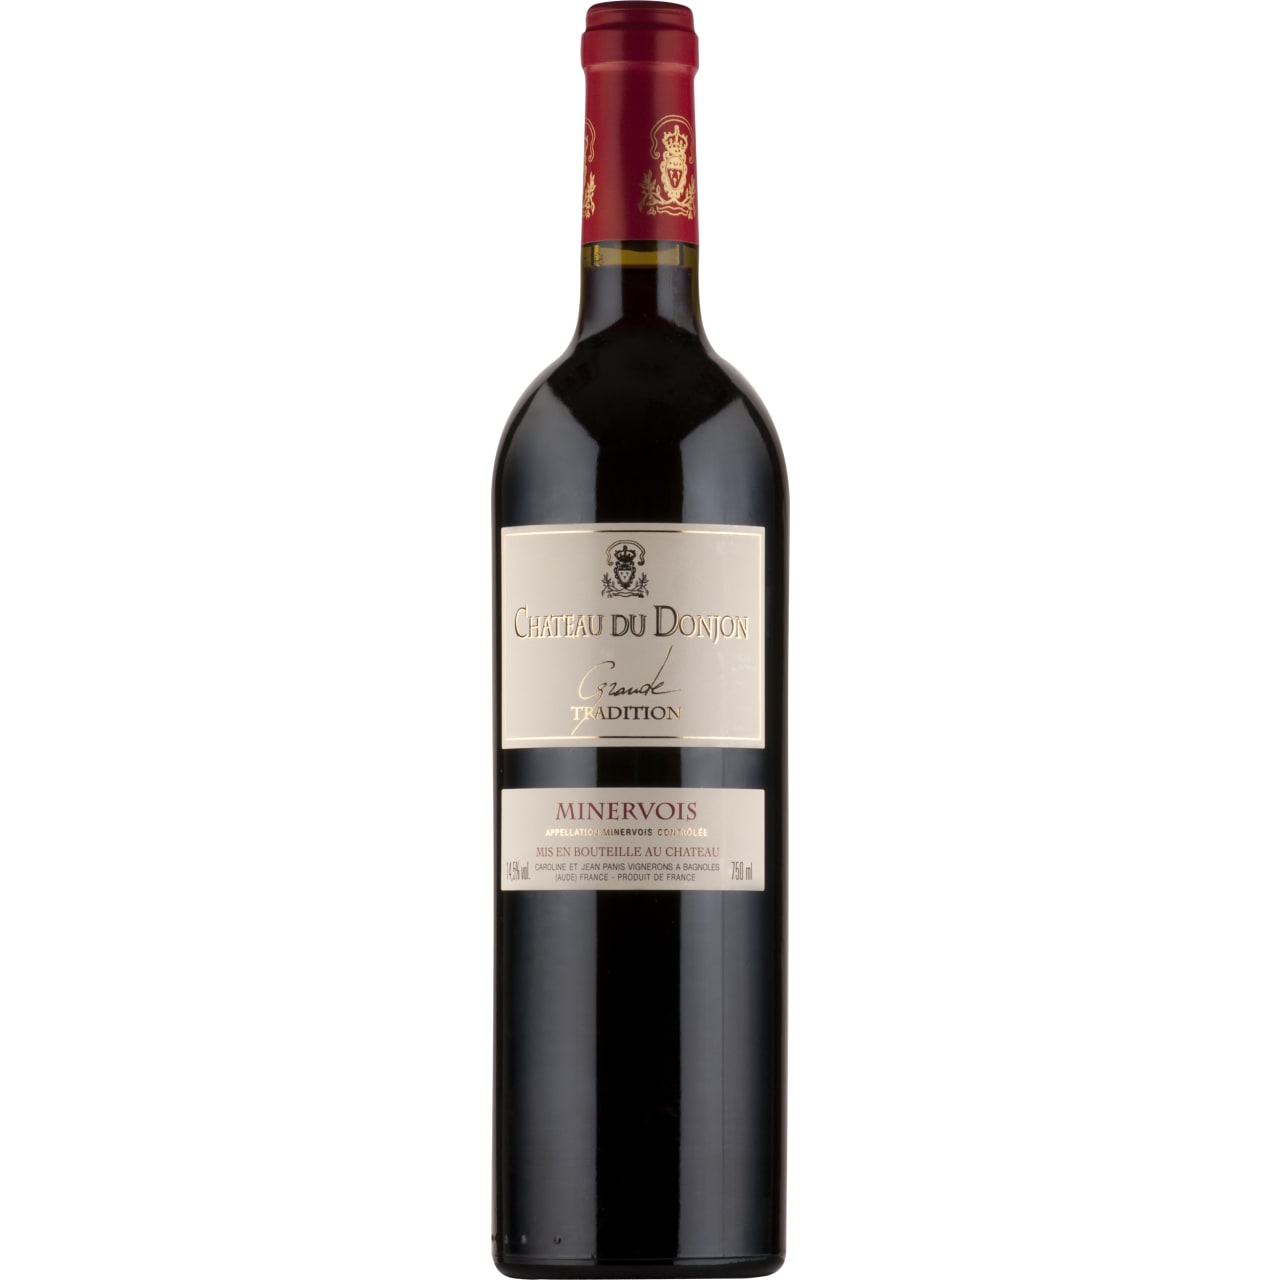 This juicy Languedoc red offers layers of flavour with a ripe intense black fruit finish - delicious!